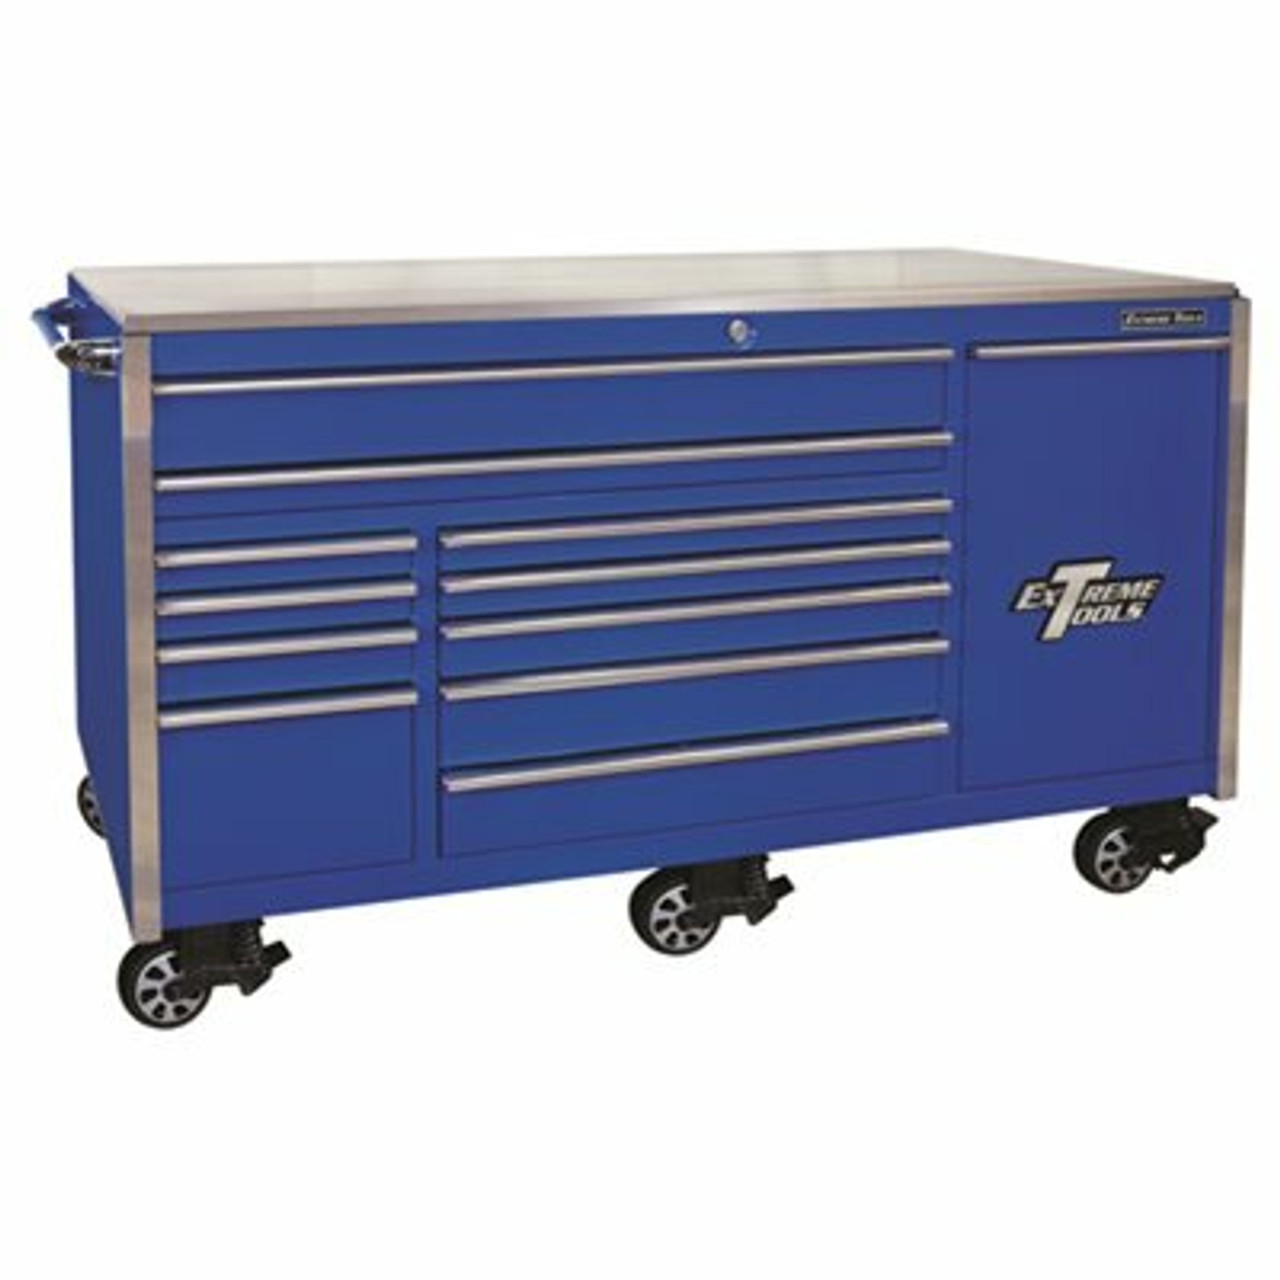 76 In. 12-Drawer Professional Roller Cabinet Includes Vertical Power Tool Drawer & Stainless Steel Work Surface In Blue